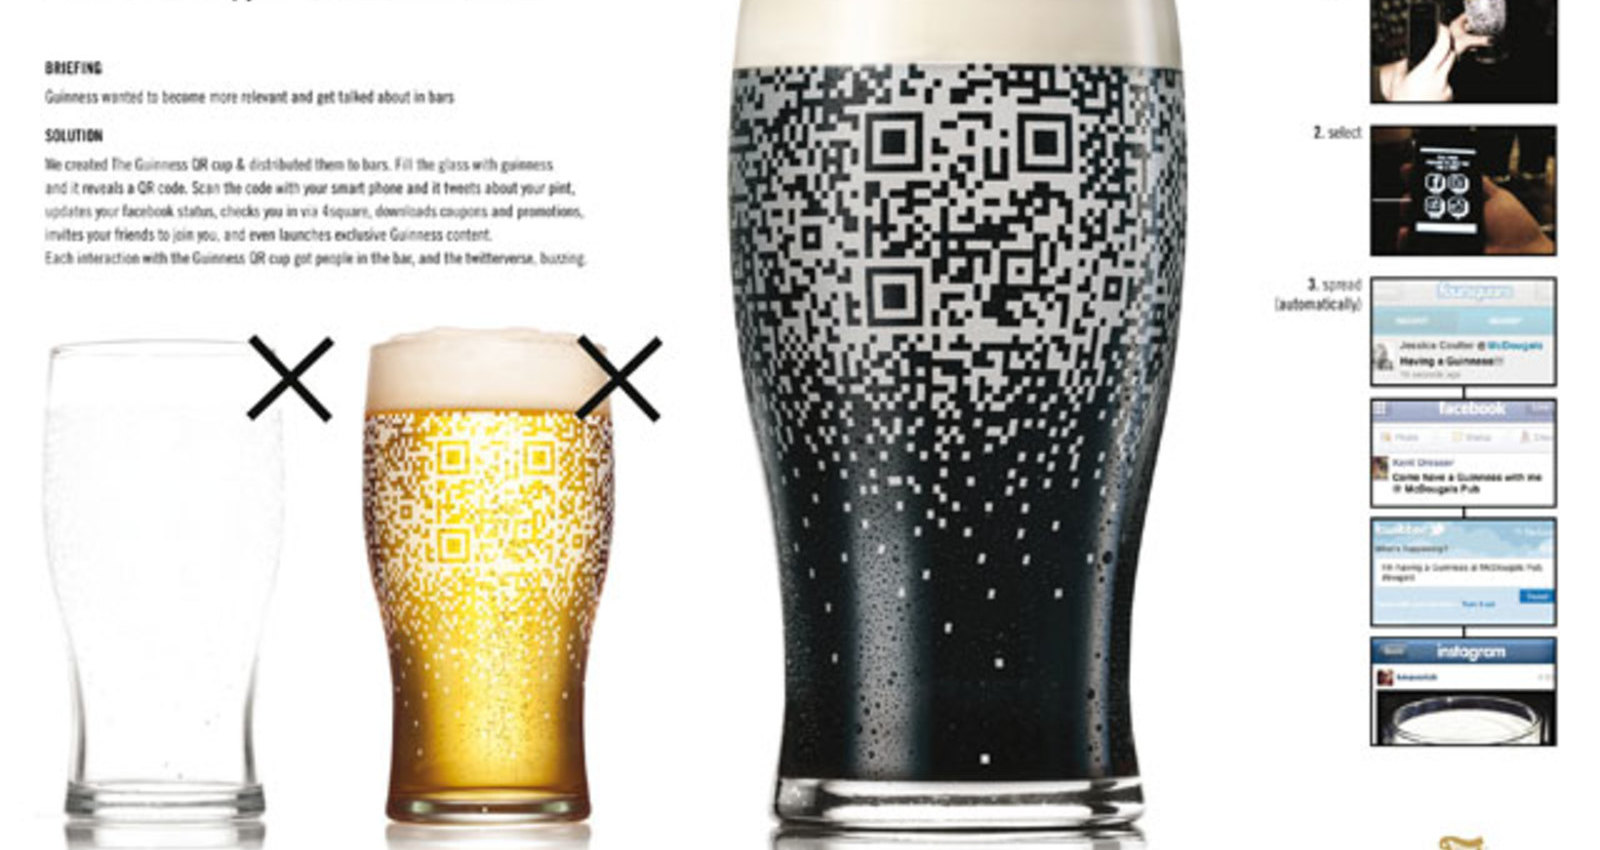 The Guinness QR Cup